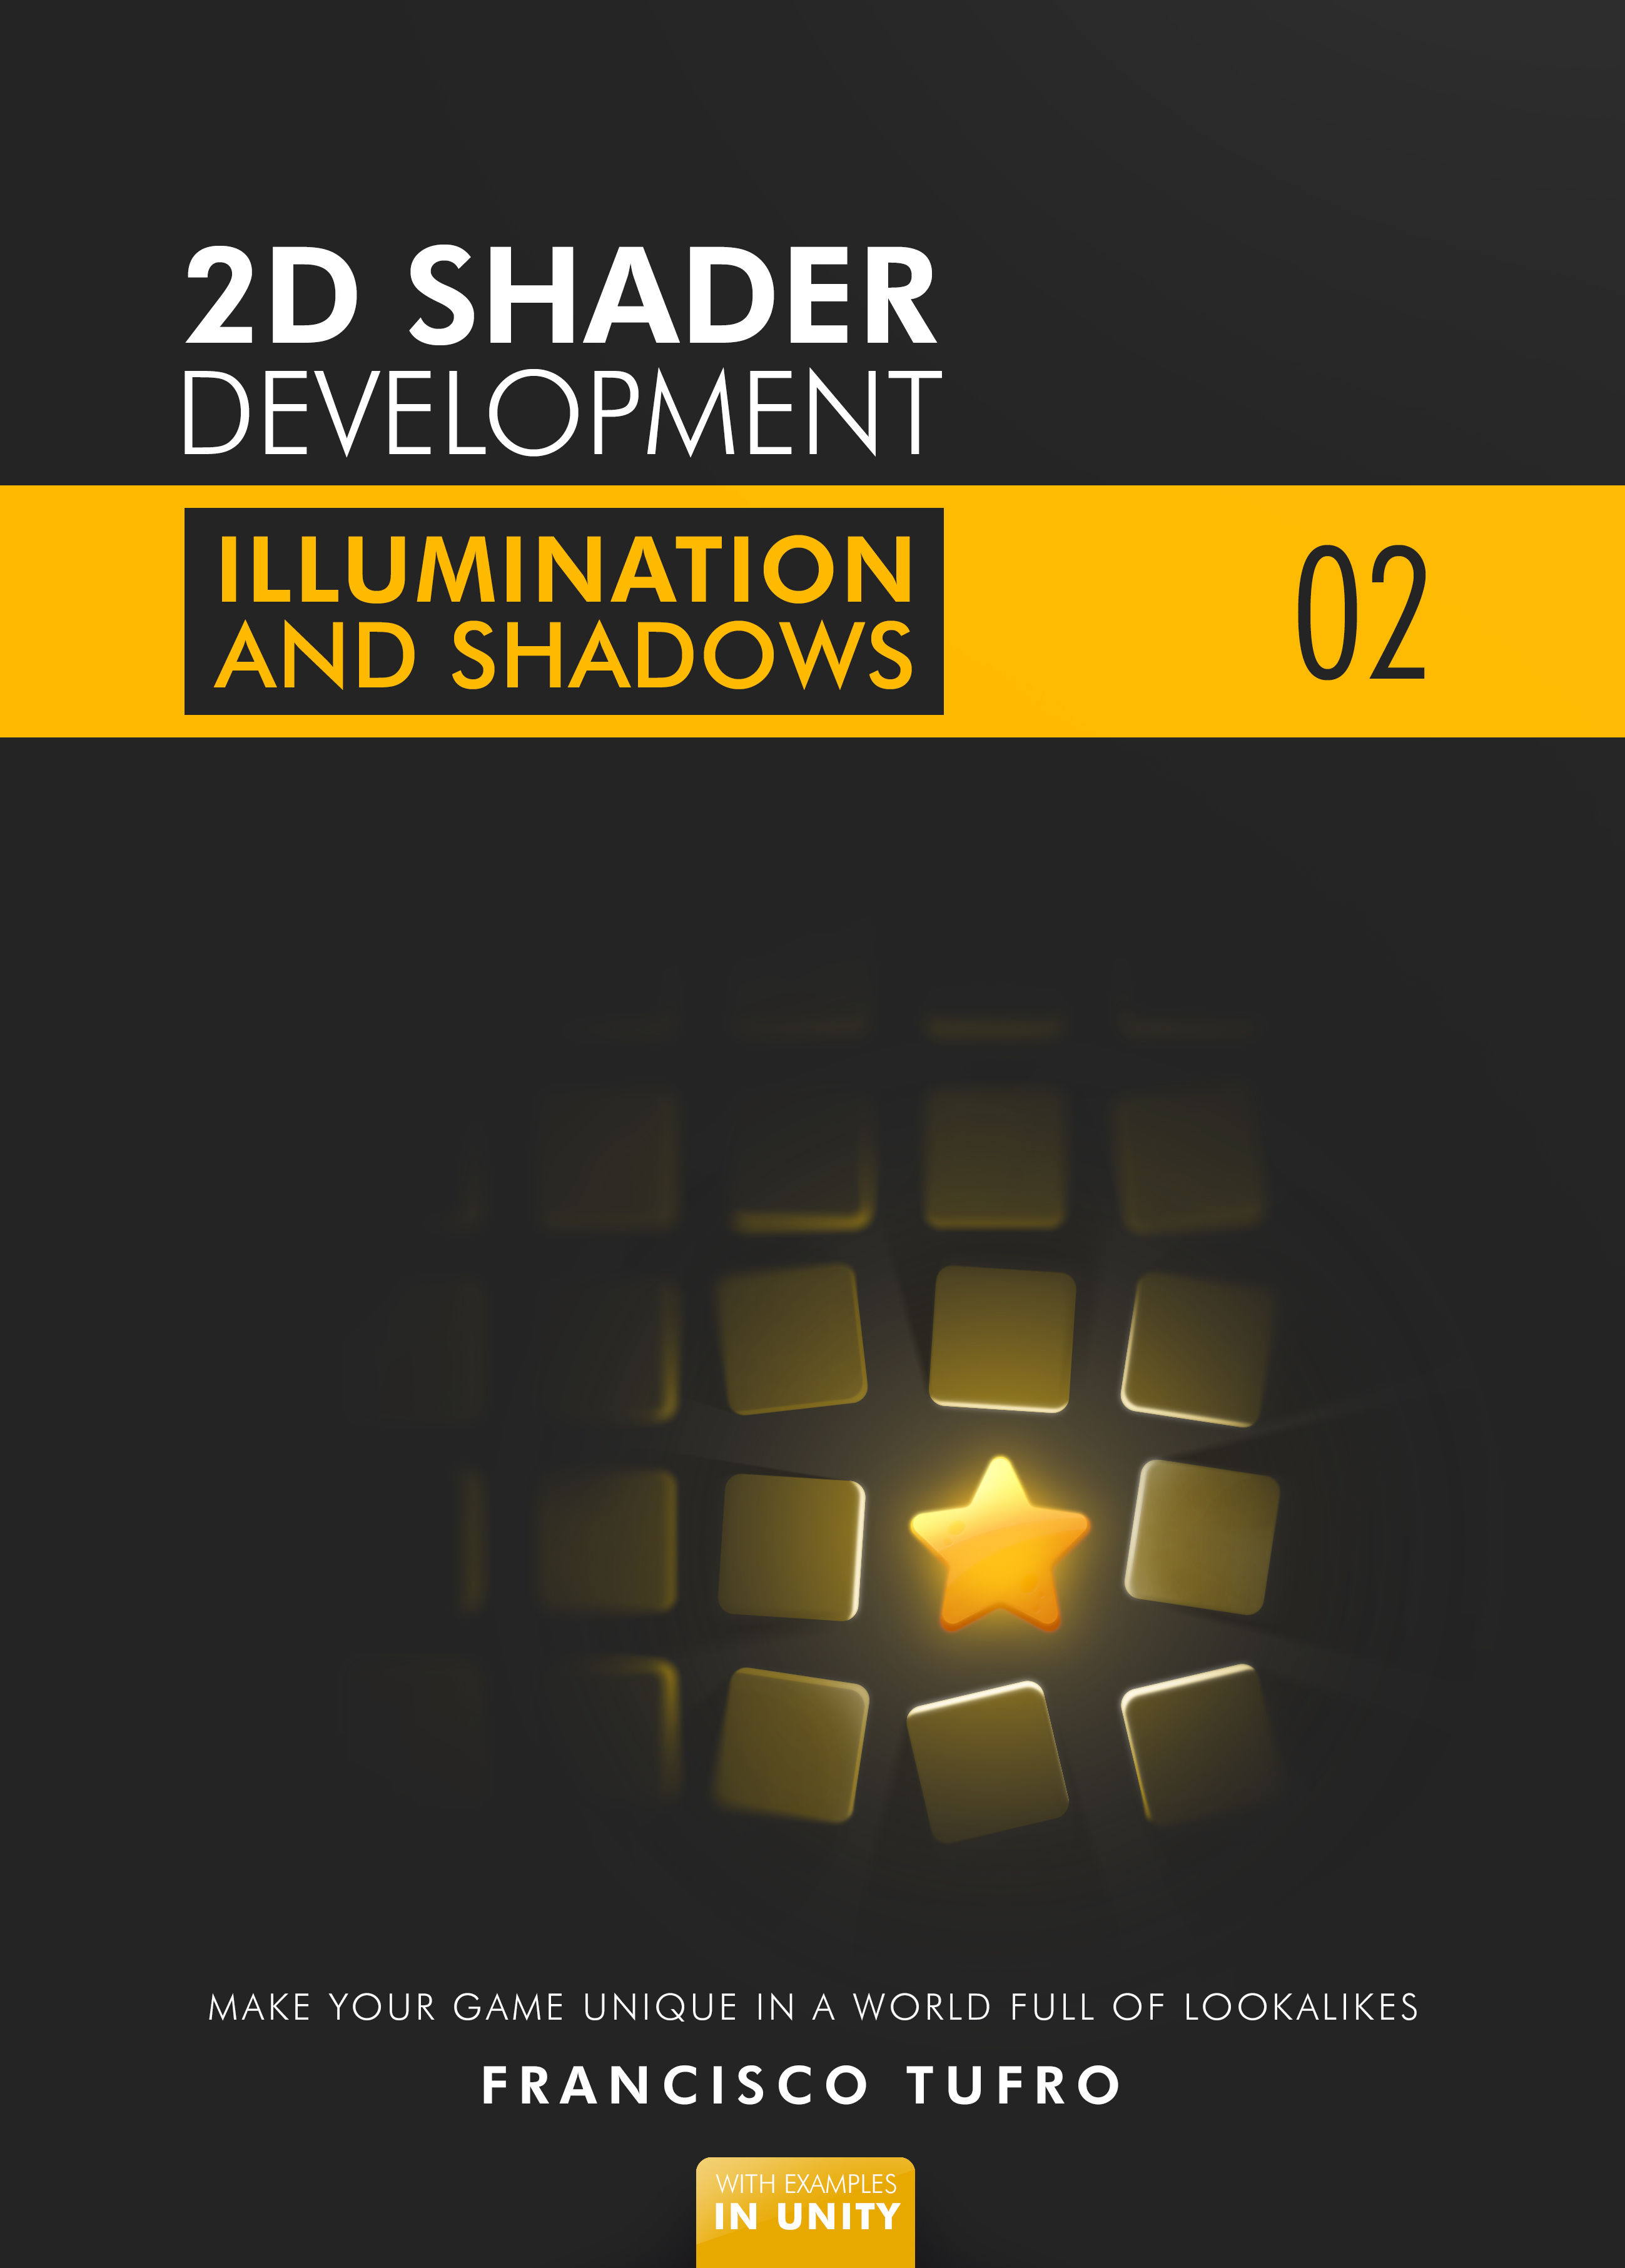 2D Shader Development Second book is out!